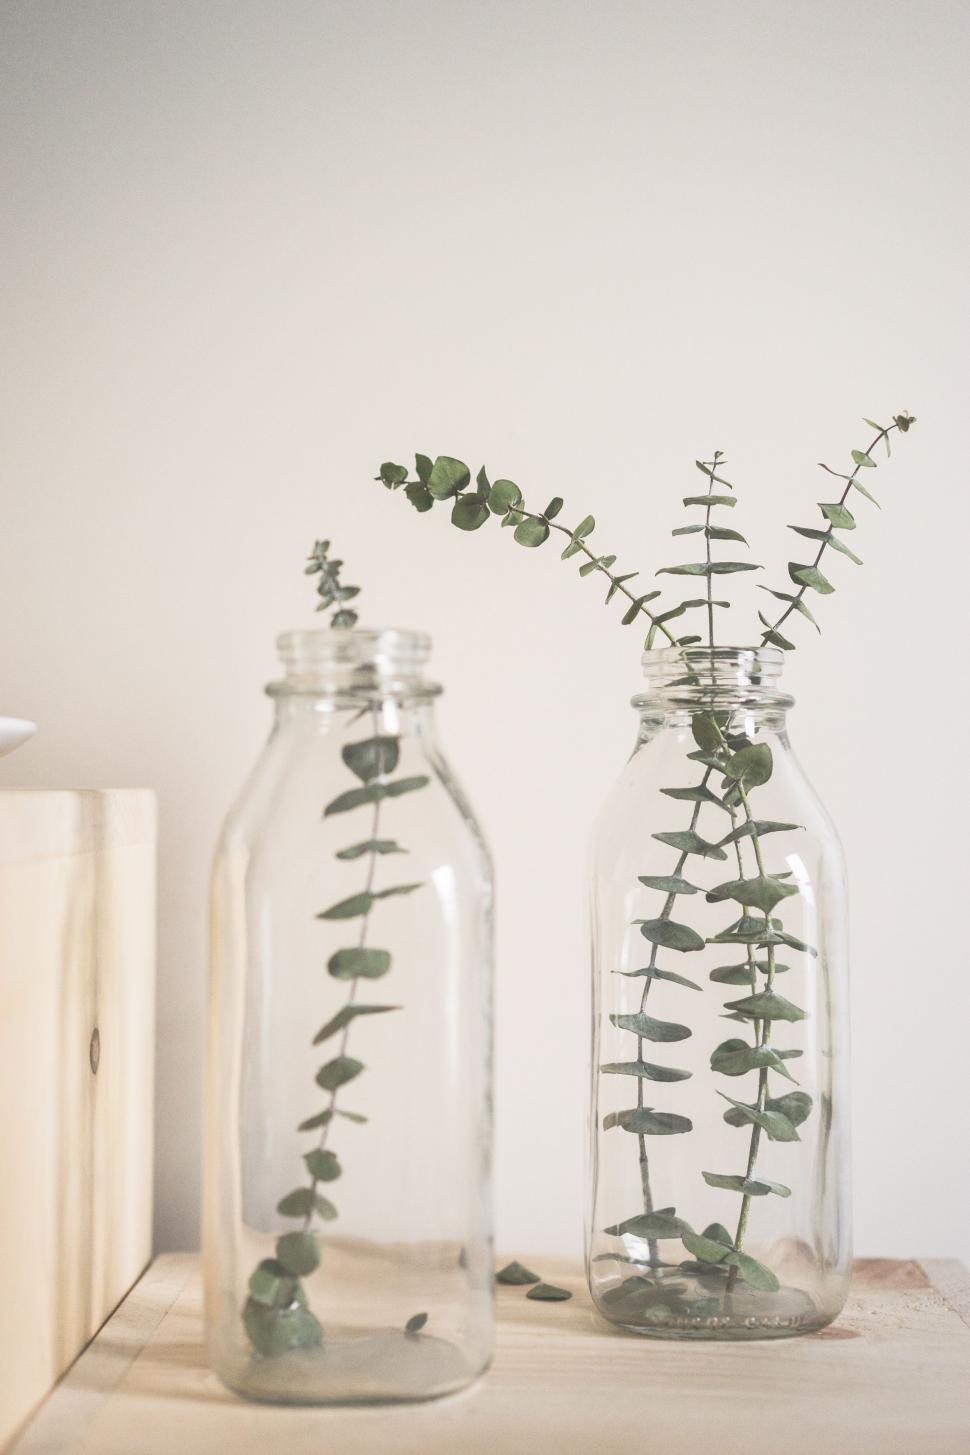 Free Image of Two Glass Vases on Table 